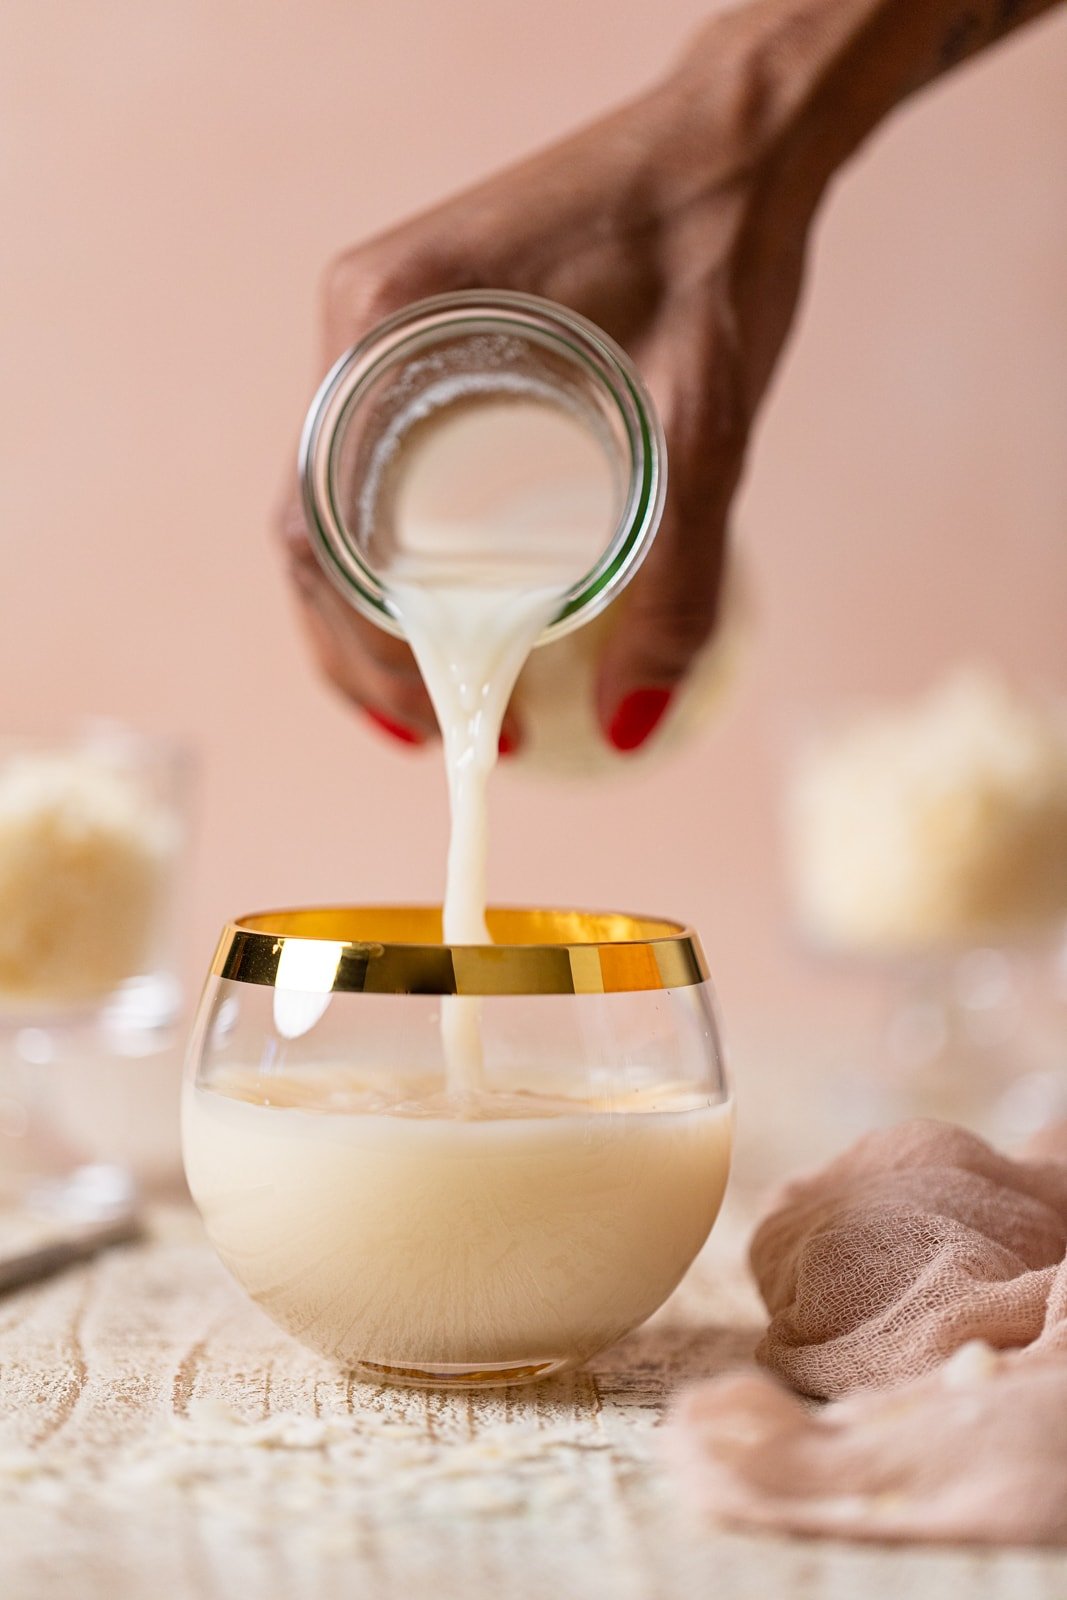 Hand holding a jar pouring Homemade Coconut Milk into a gold-rimmed glass